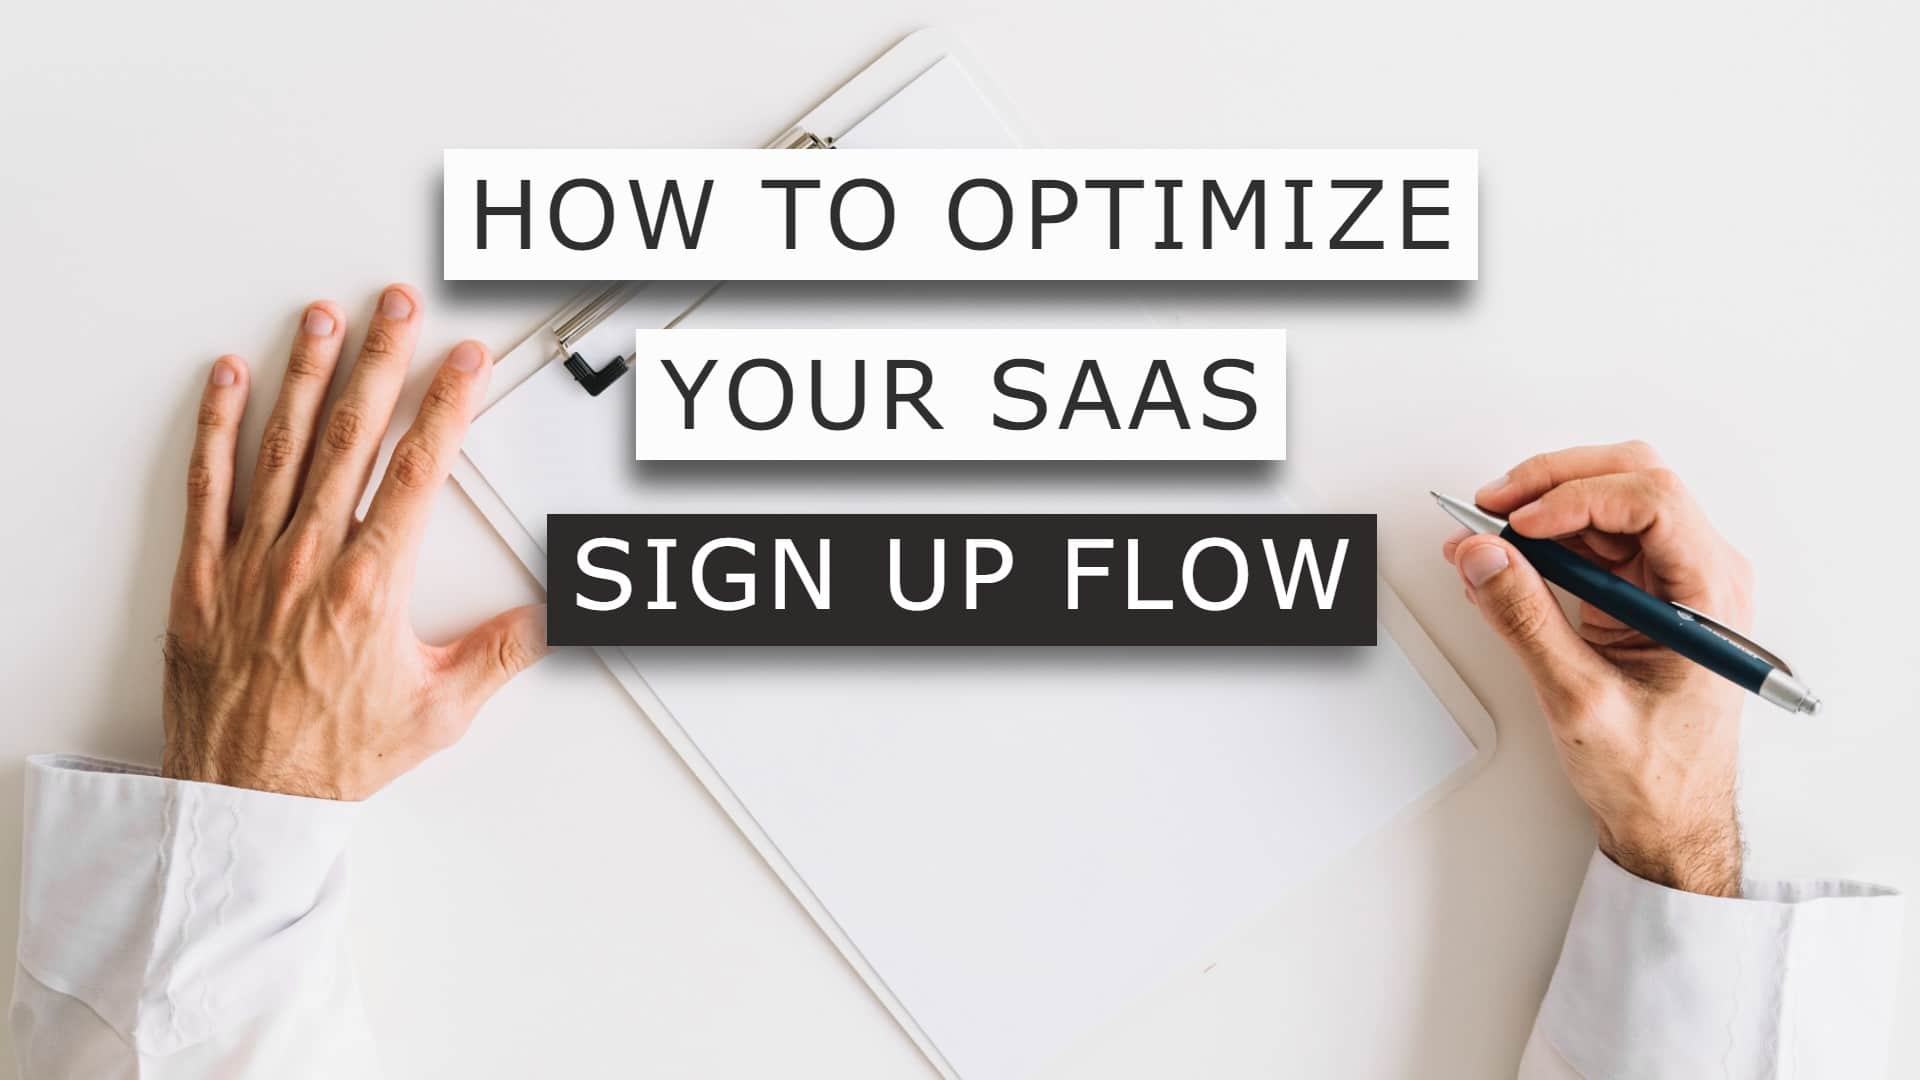 How to Optimize SaaS Sign Up Flow To Increase Conversions